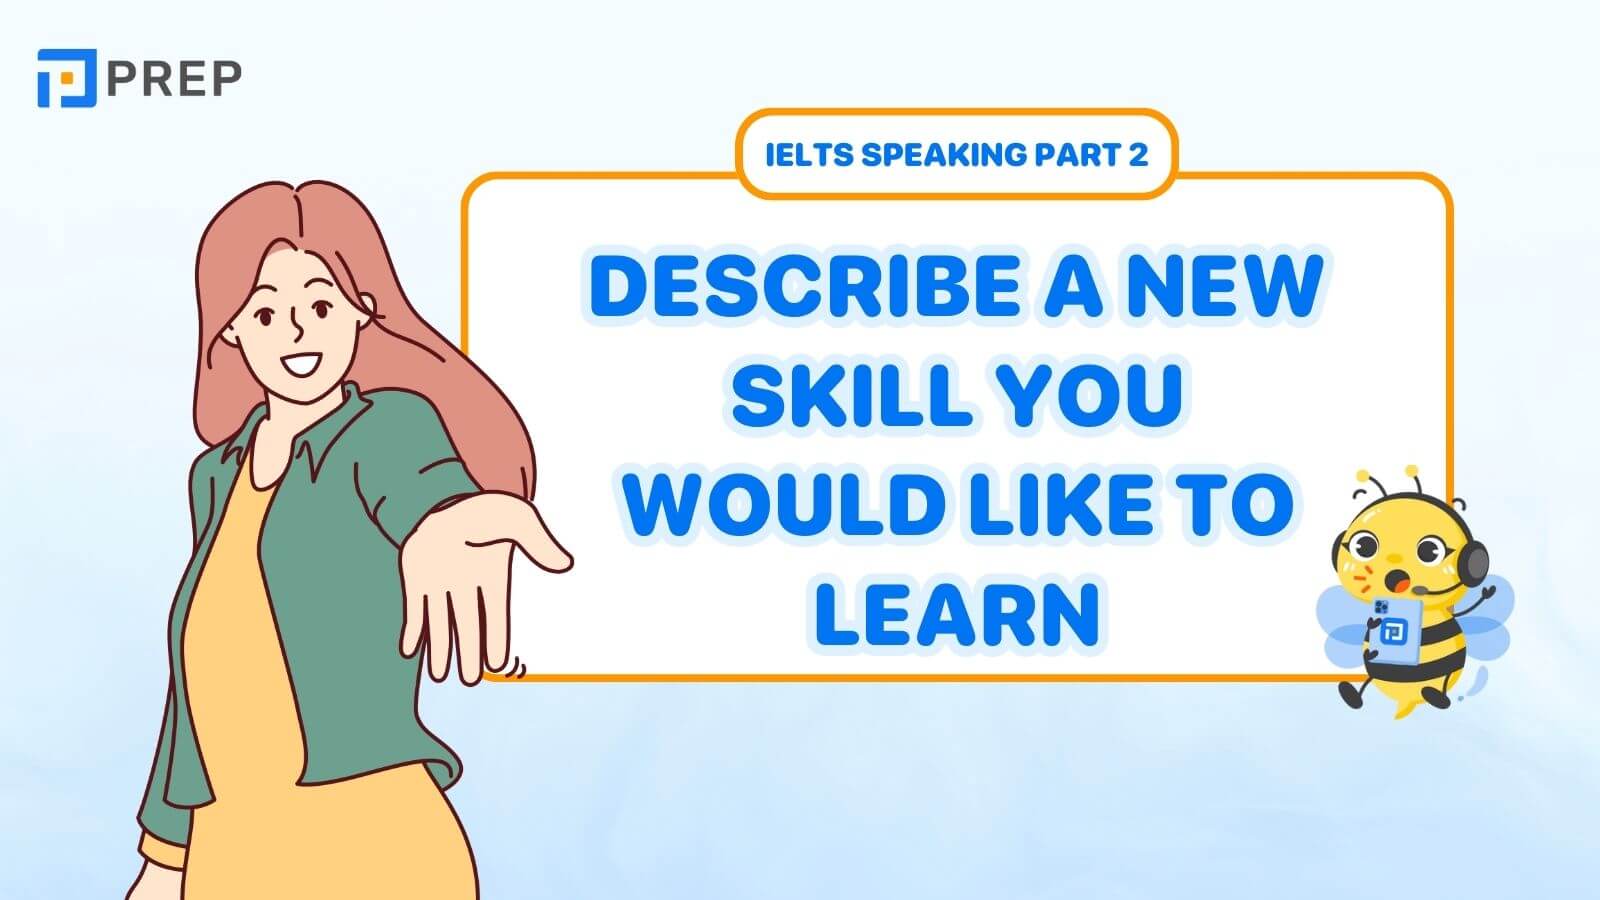 Describe a new skill you would like to learn